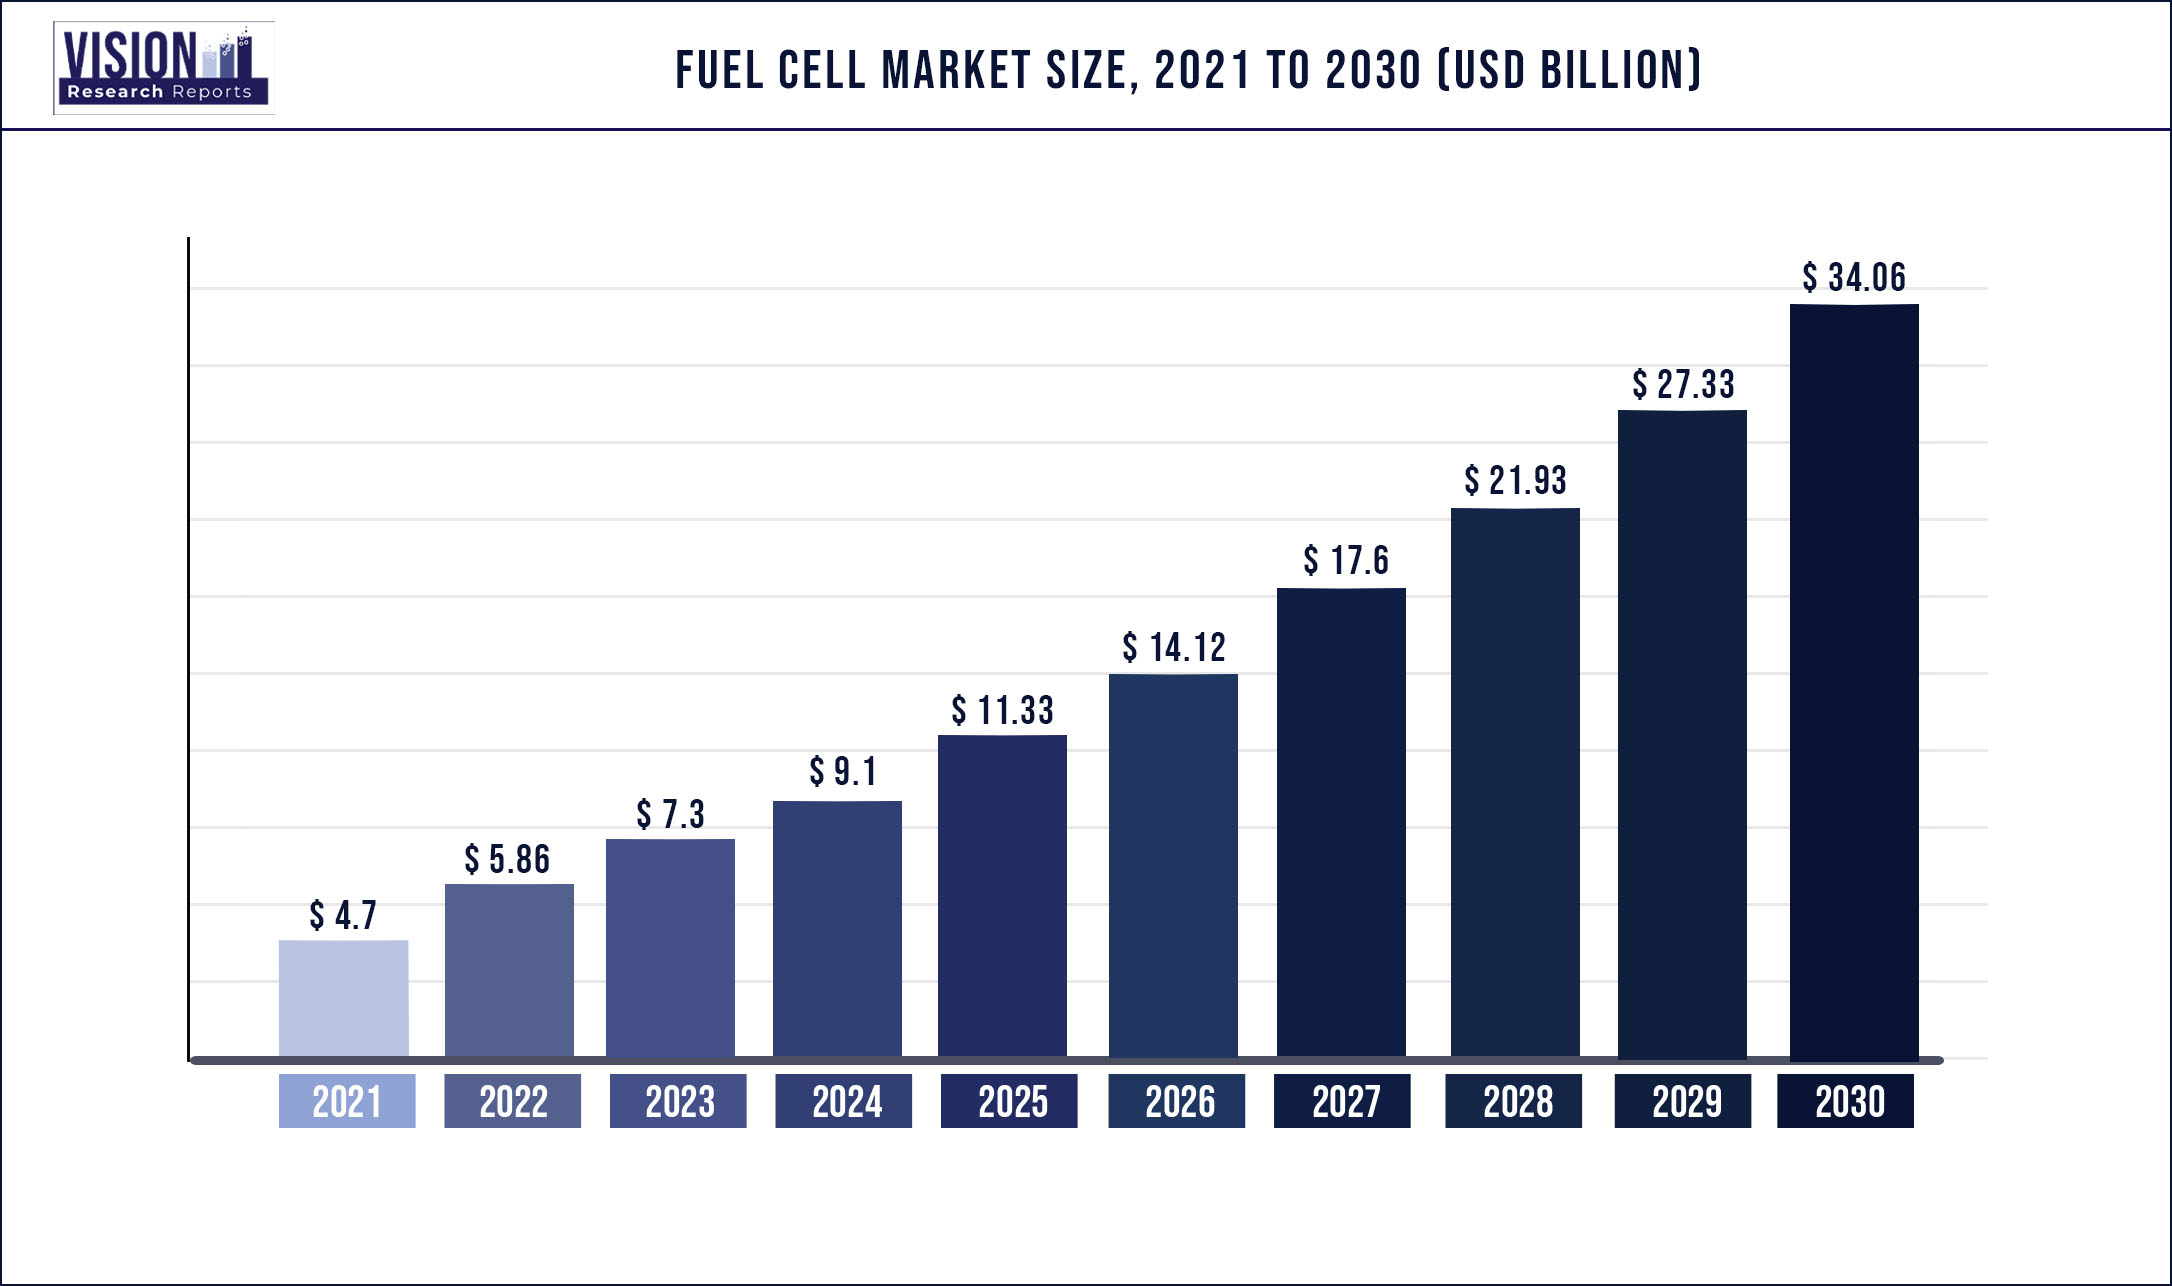 Fuel Cell Market Size 2021 to 2030